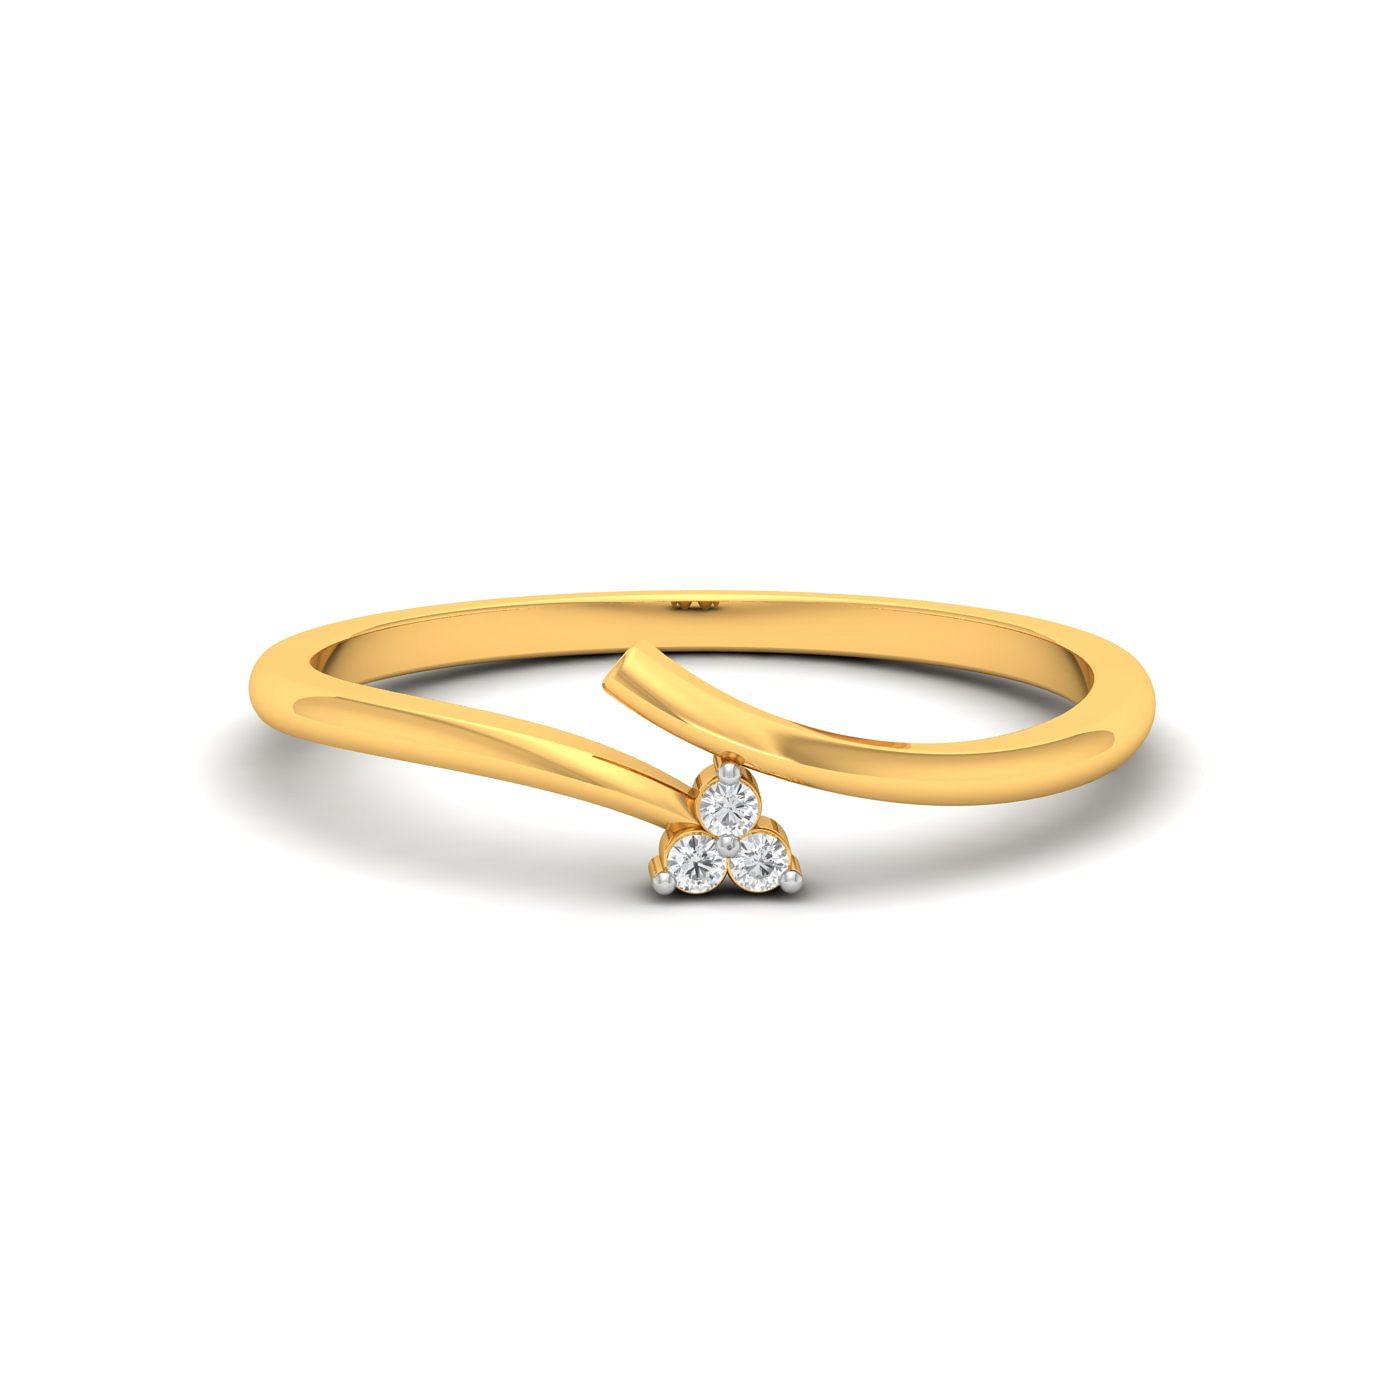 Light weight classic design Three Stone Delicate Diamond Ring for gift